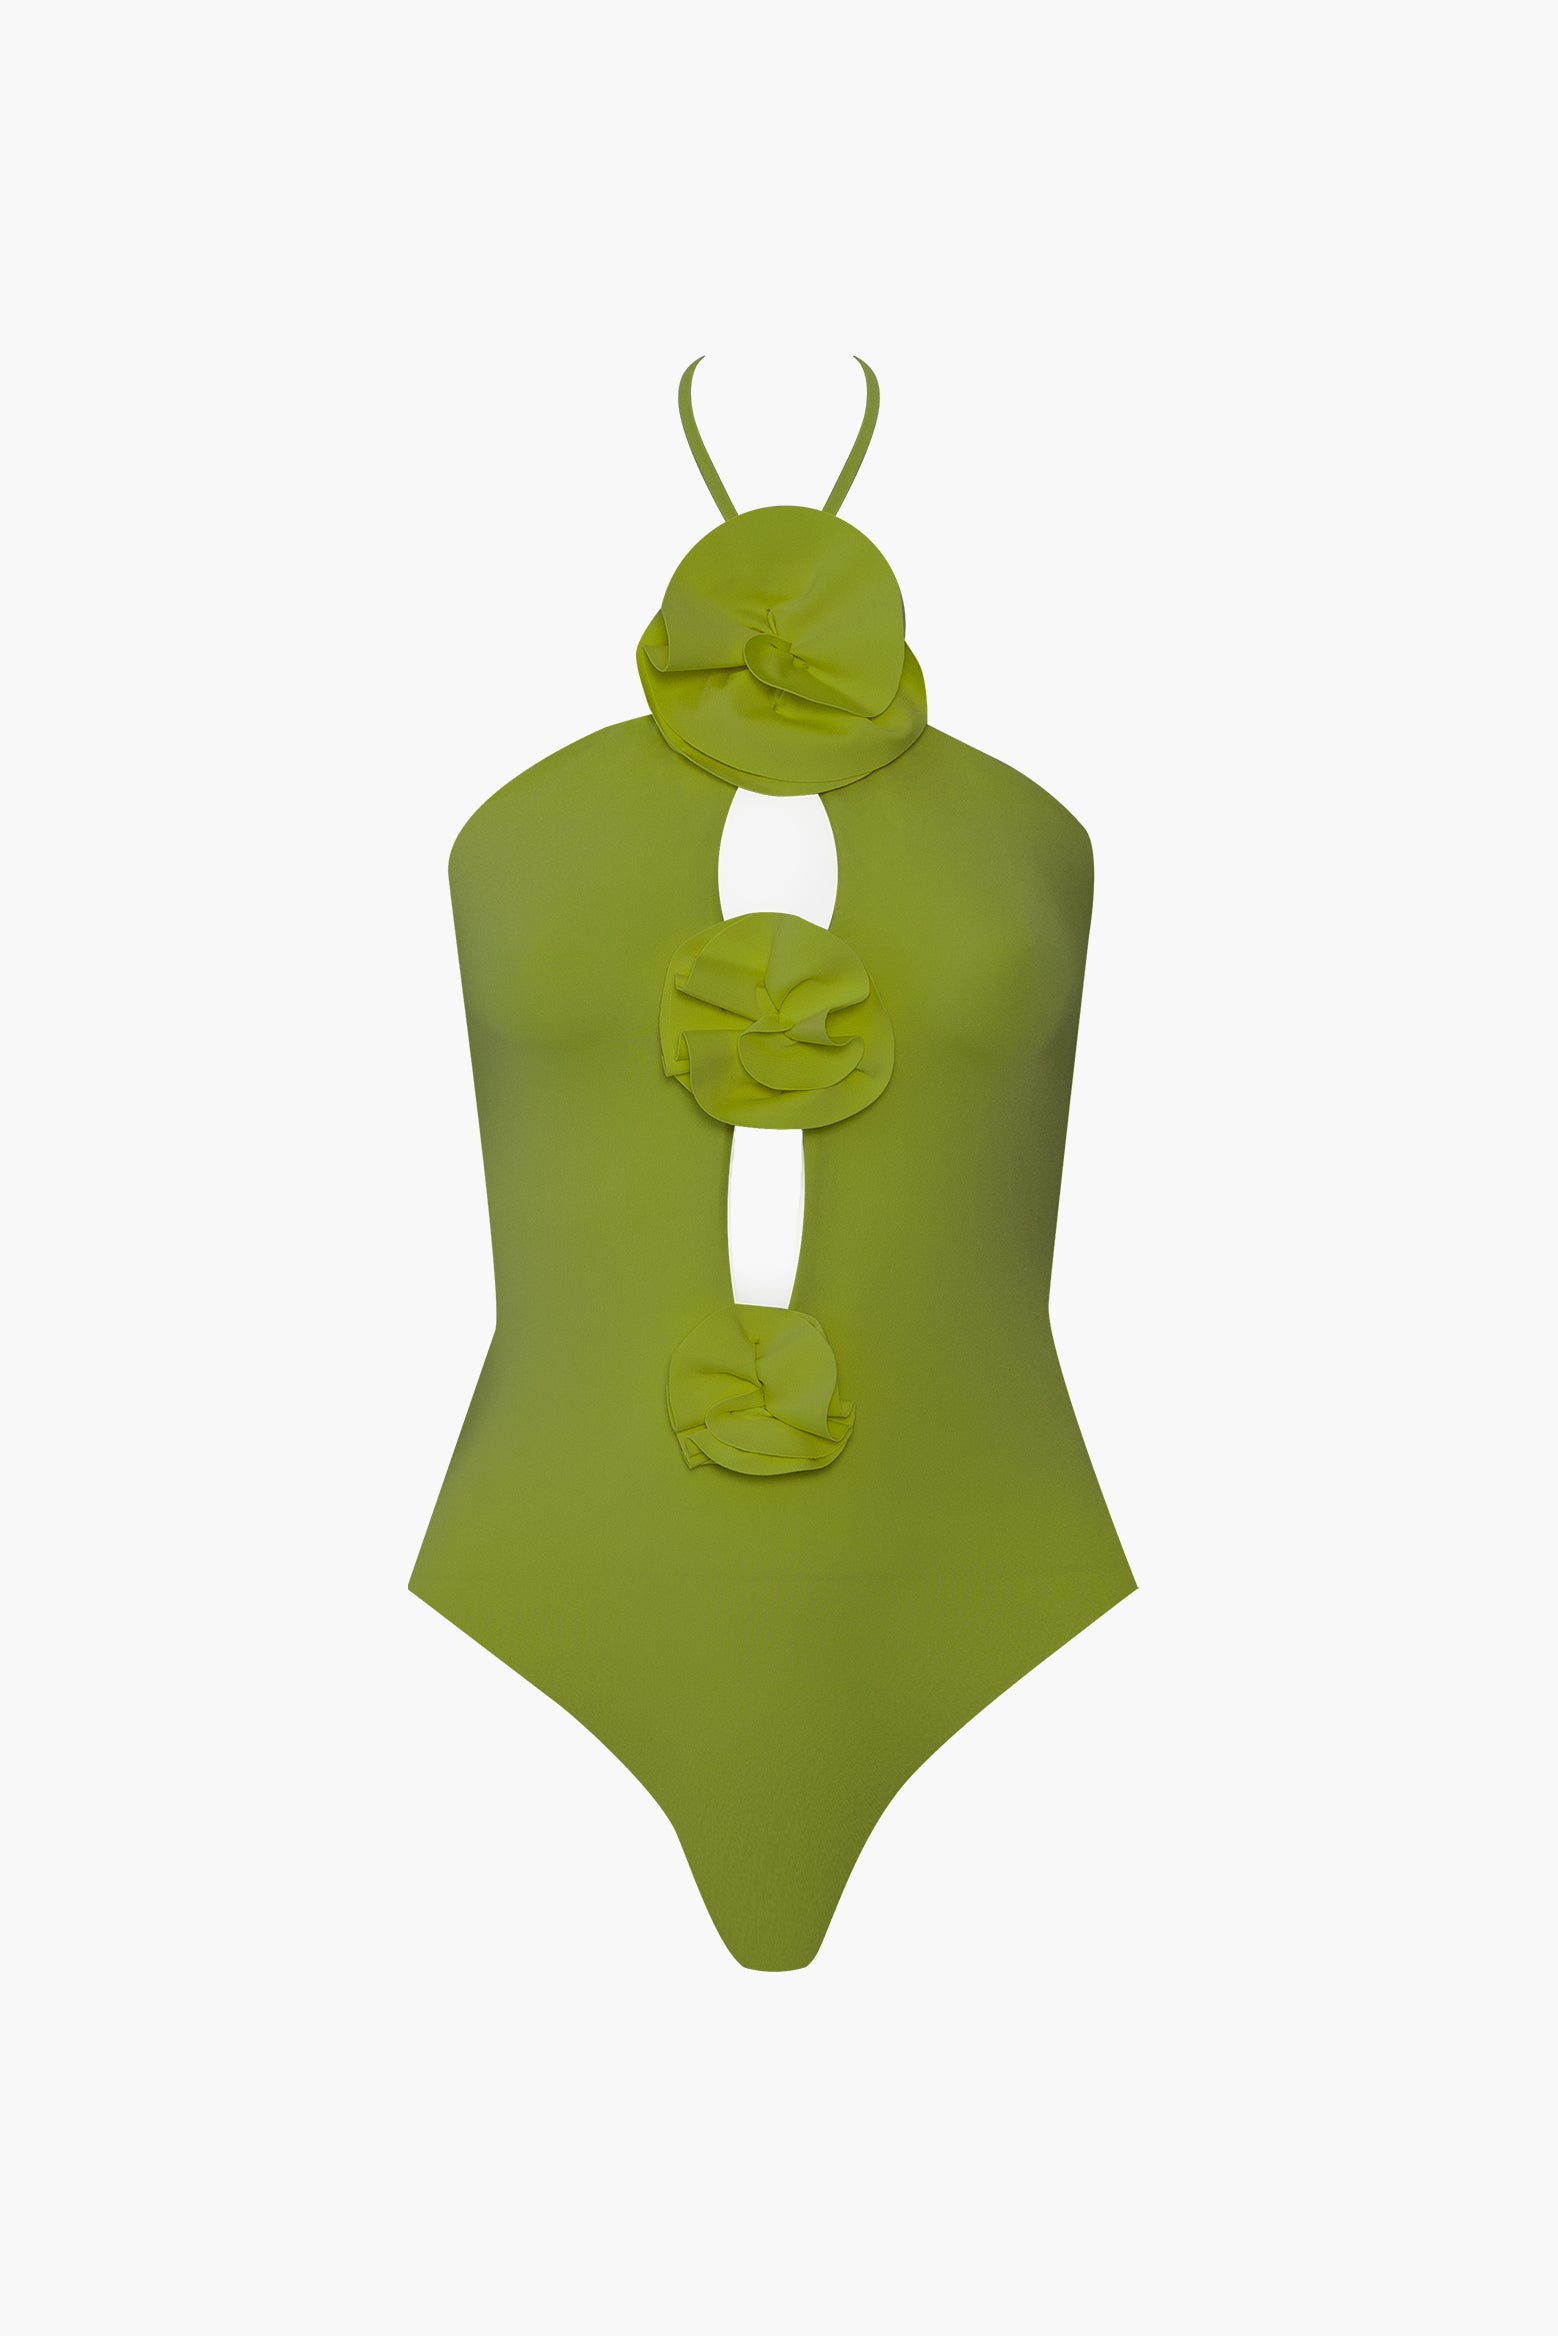 Maygel Coronel Fiora Swimsuit in Lemongrass available at The New Trend Australia. 